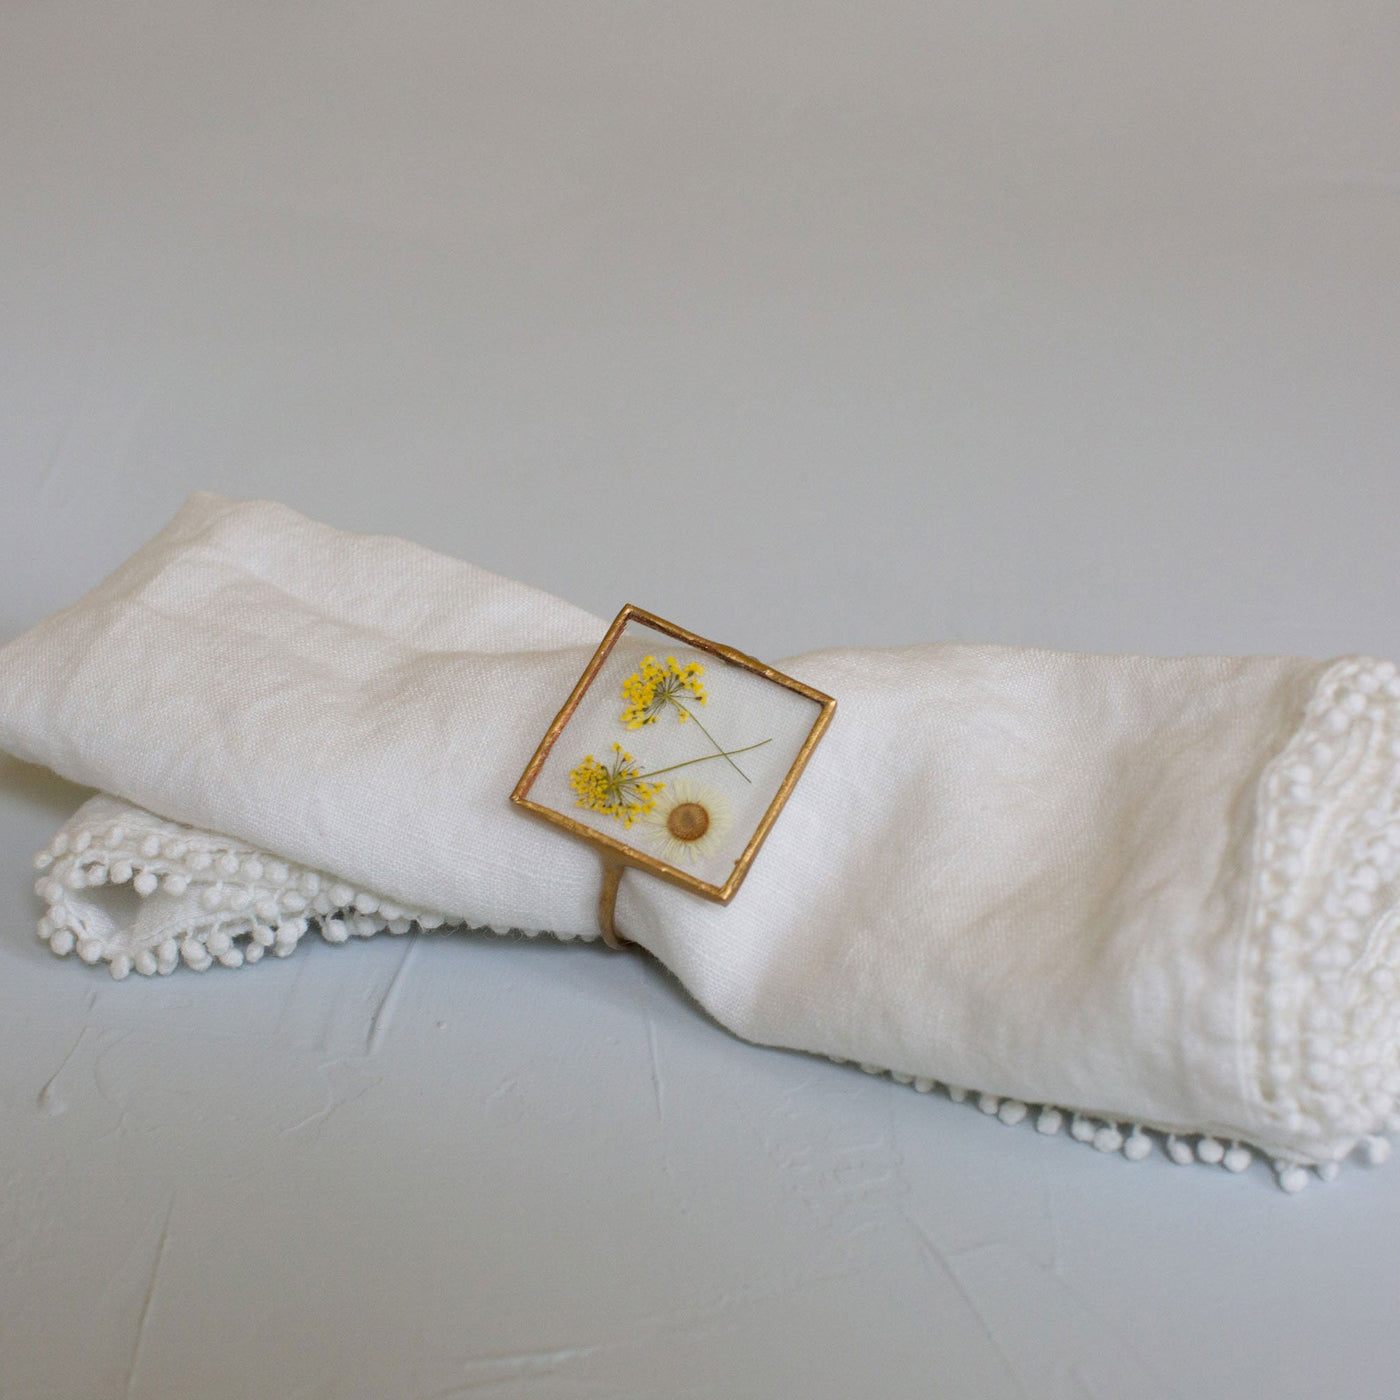 Queen Anne's Lace Square Pressed Floral Napkin Ring Set